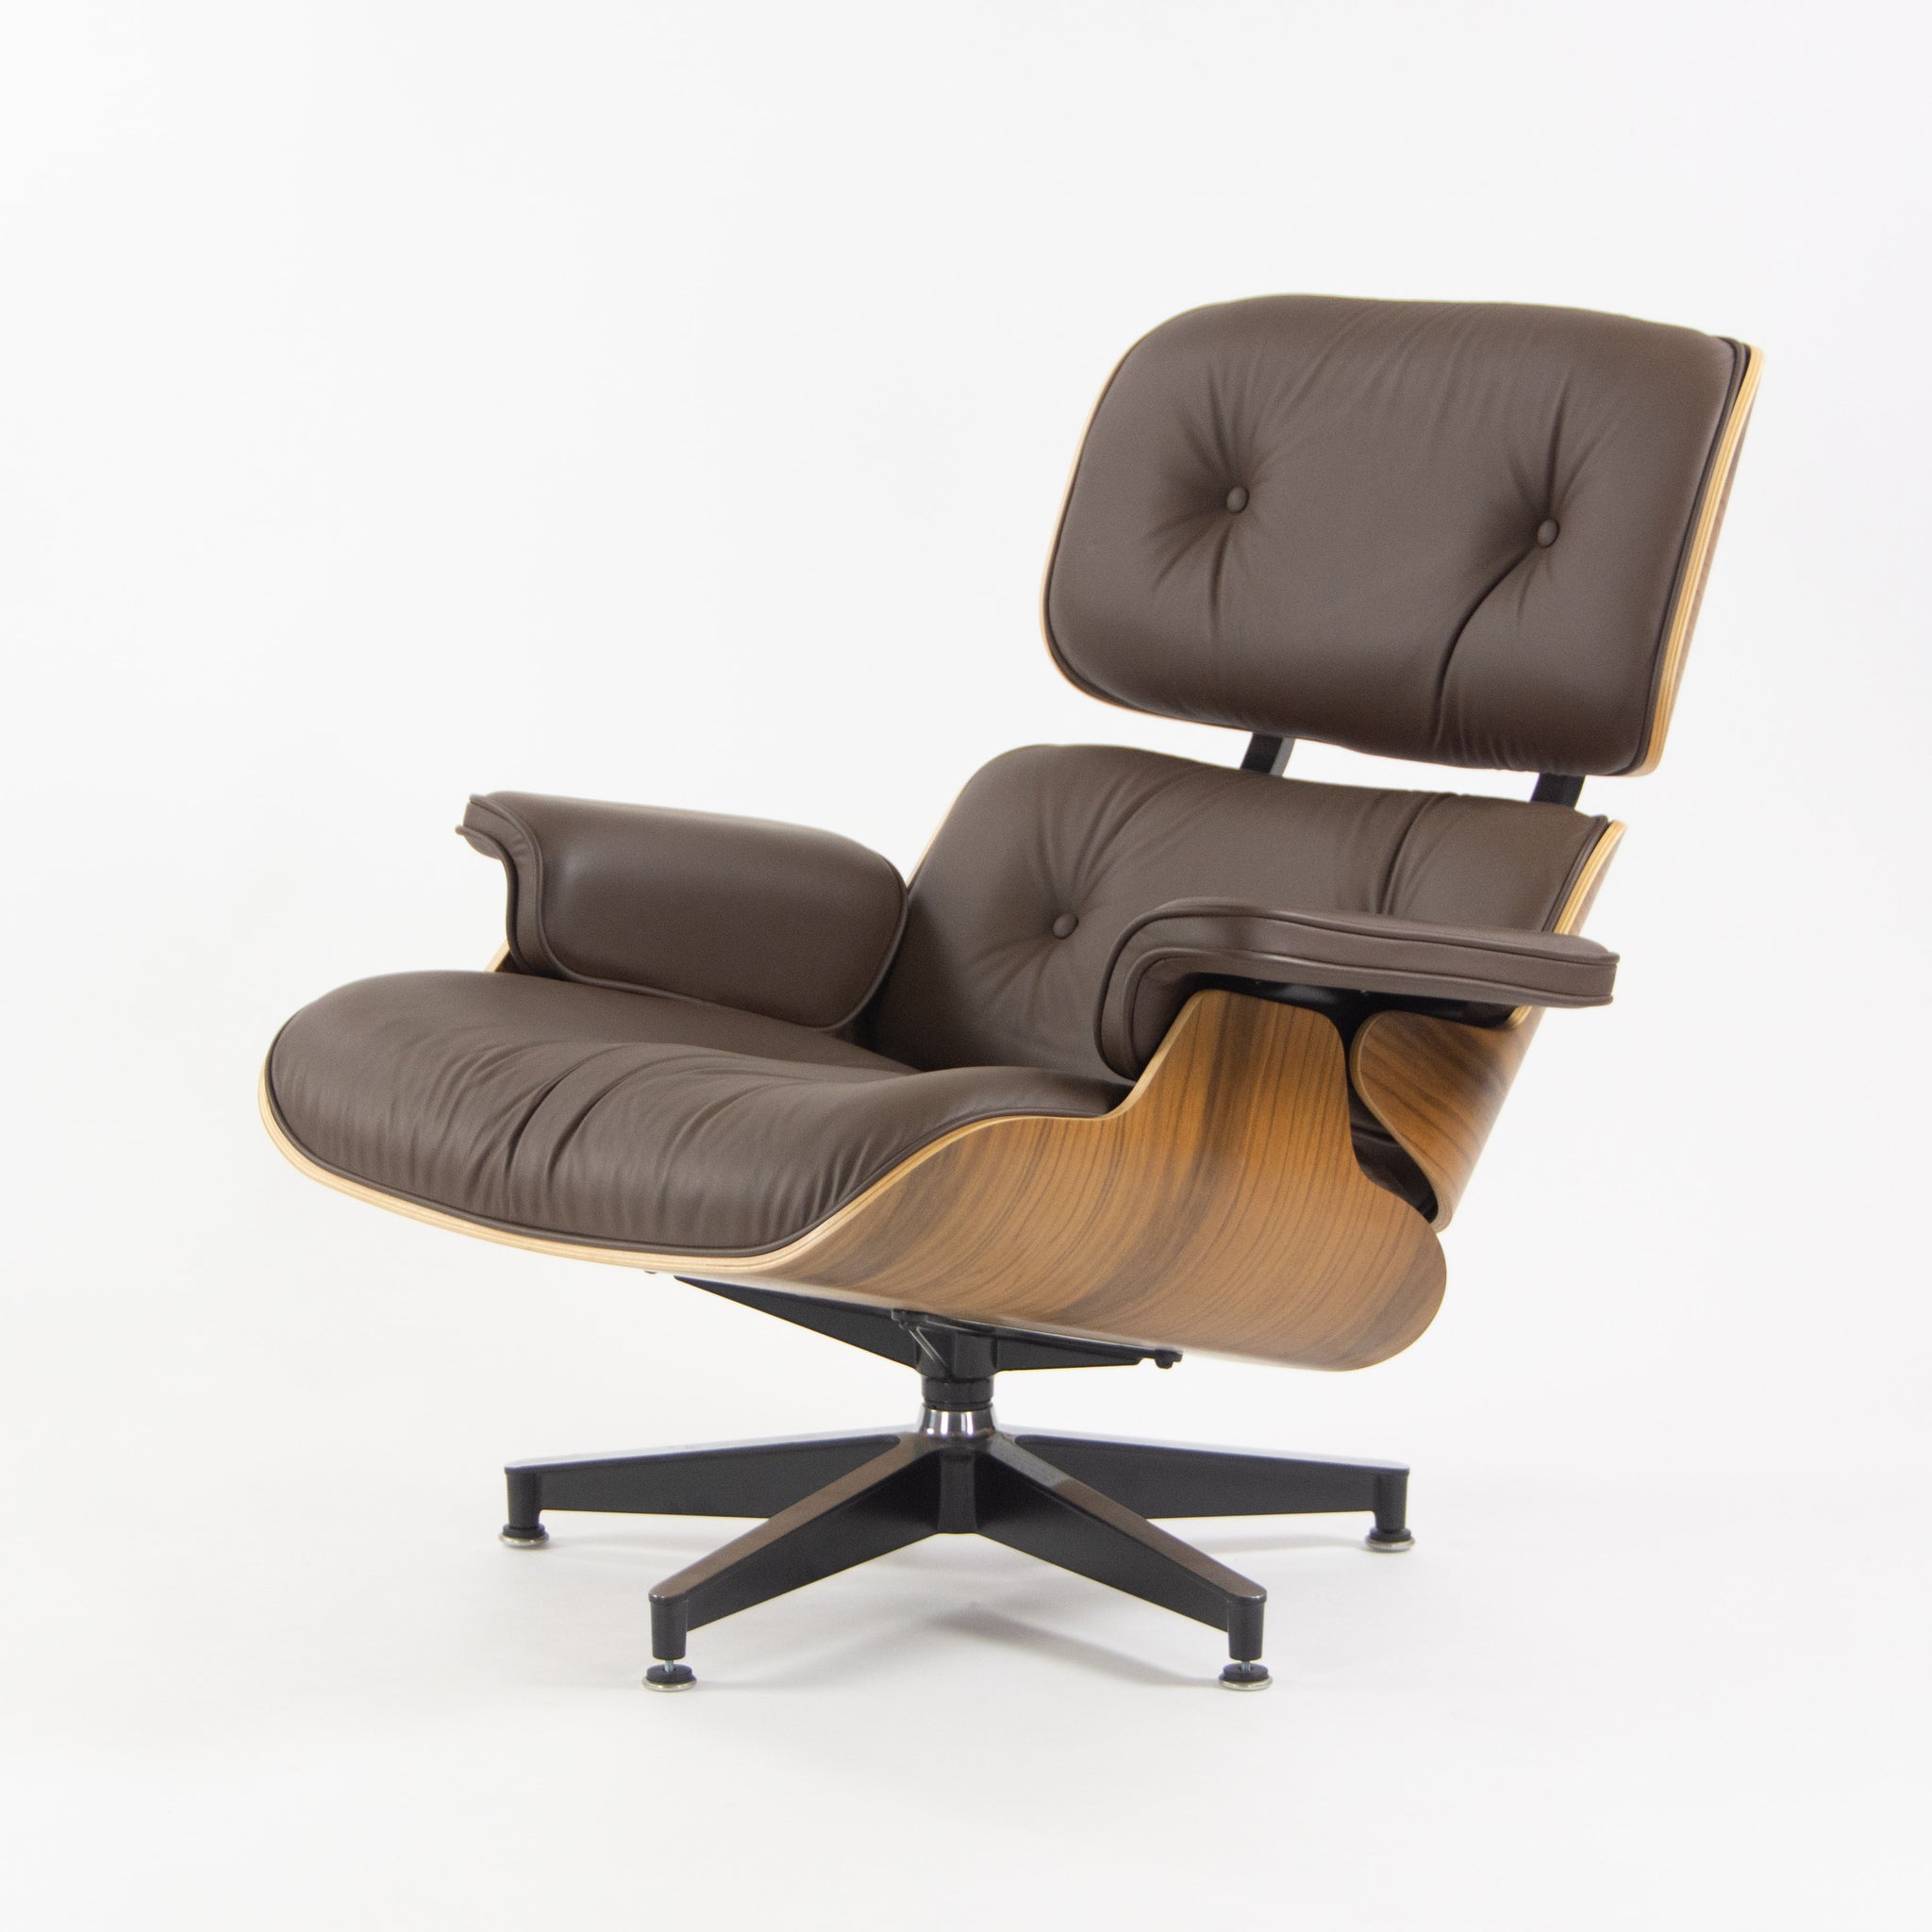 SOLD Herman Miller 2019 Brand New Eames Lounge Chair and Ottoman Walnut Brown Leather